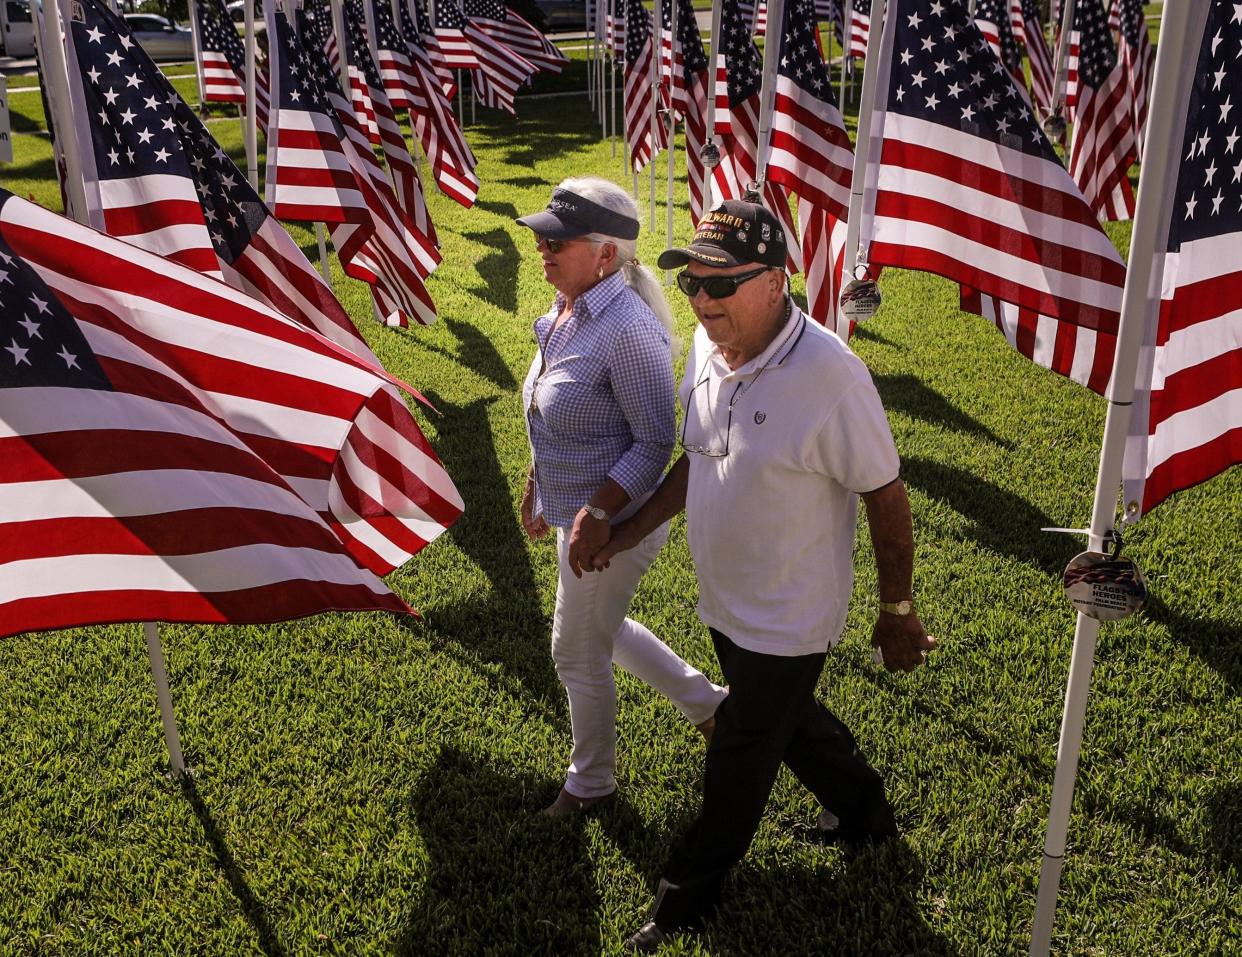 Joan Sargent and her dad, ninety-eight year-old WWII Veteran Bill Nacinovich, walk through a field of flags during the inaugural Flags for Heroes charity event at Bradley Park in 2019. This year's event begins Monday.